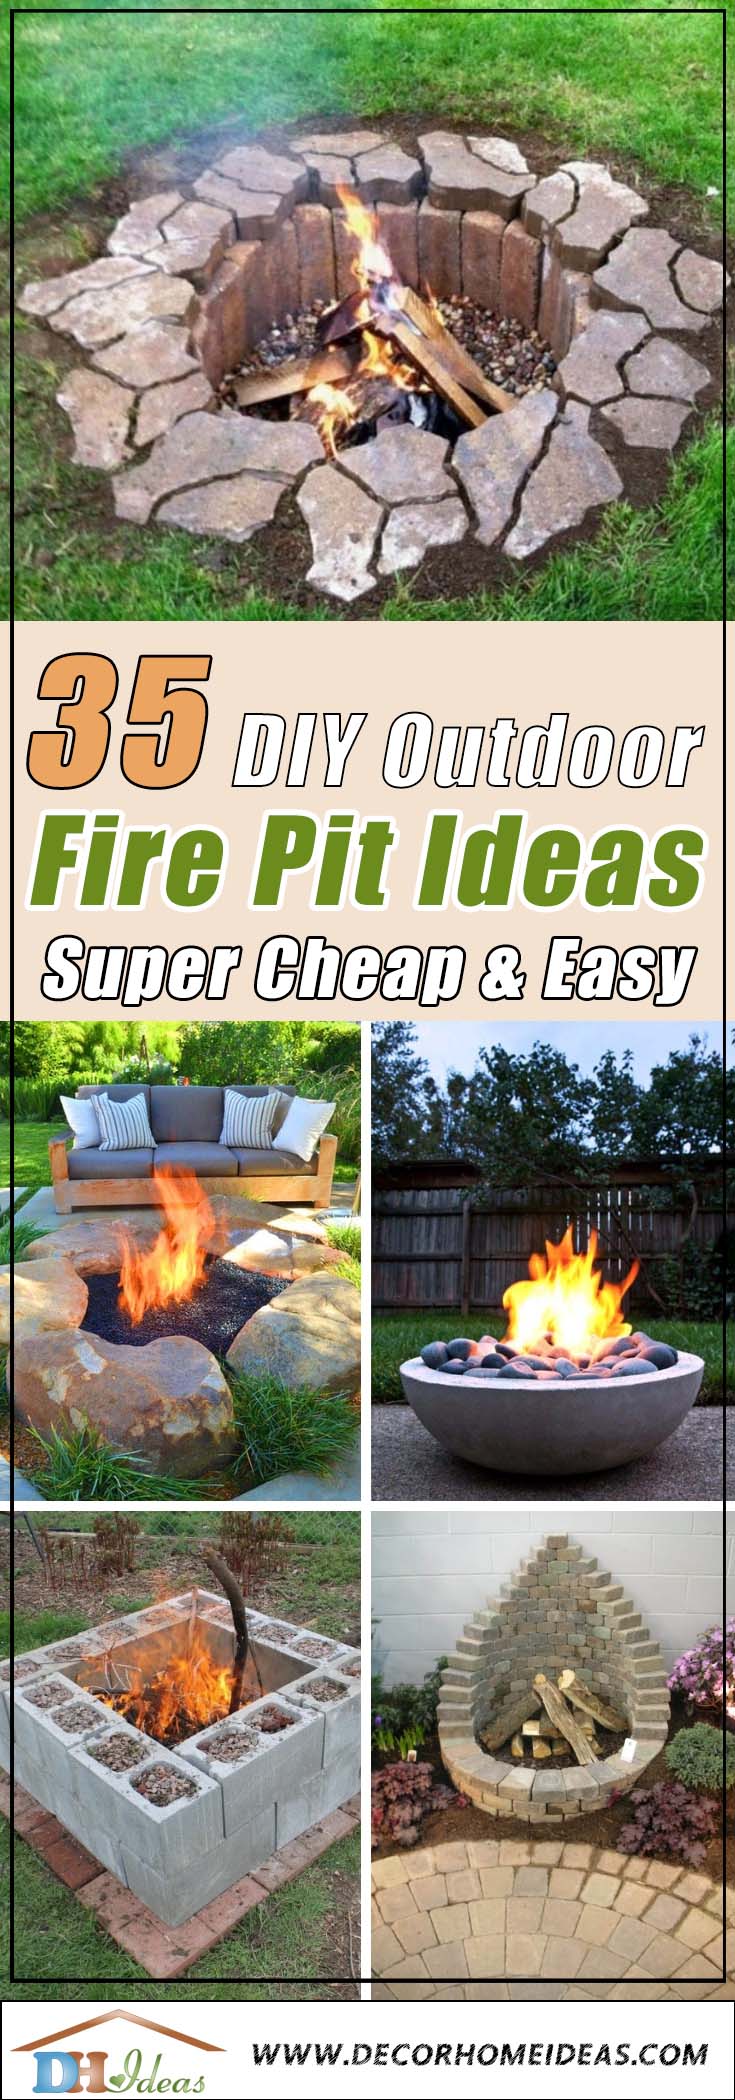 35 Easy To Do Fire Pit Ideas And, Simple Backyard Fire Pit Ideas